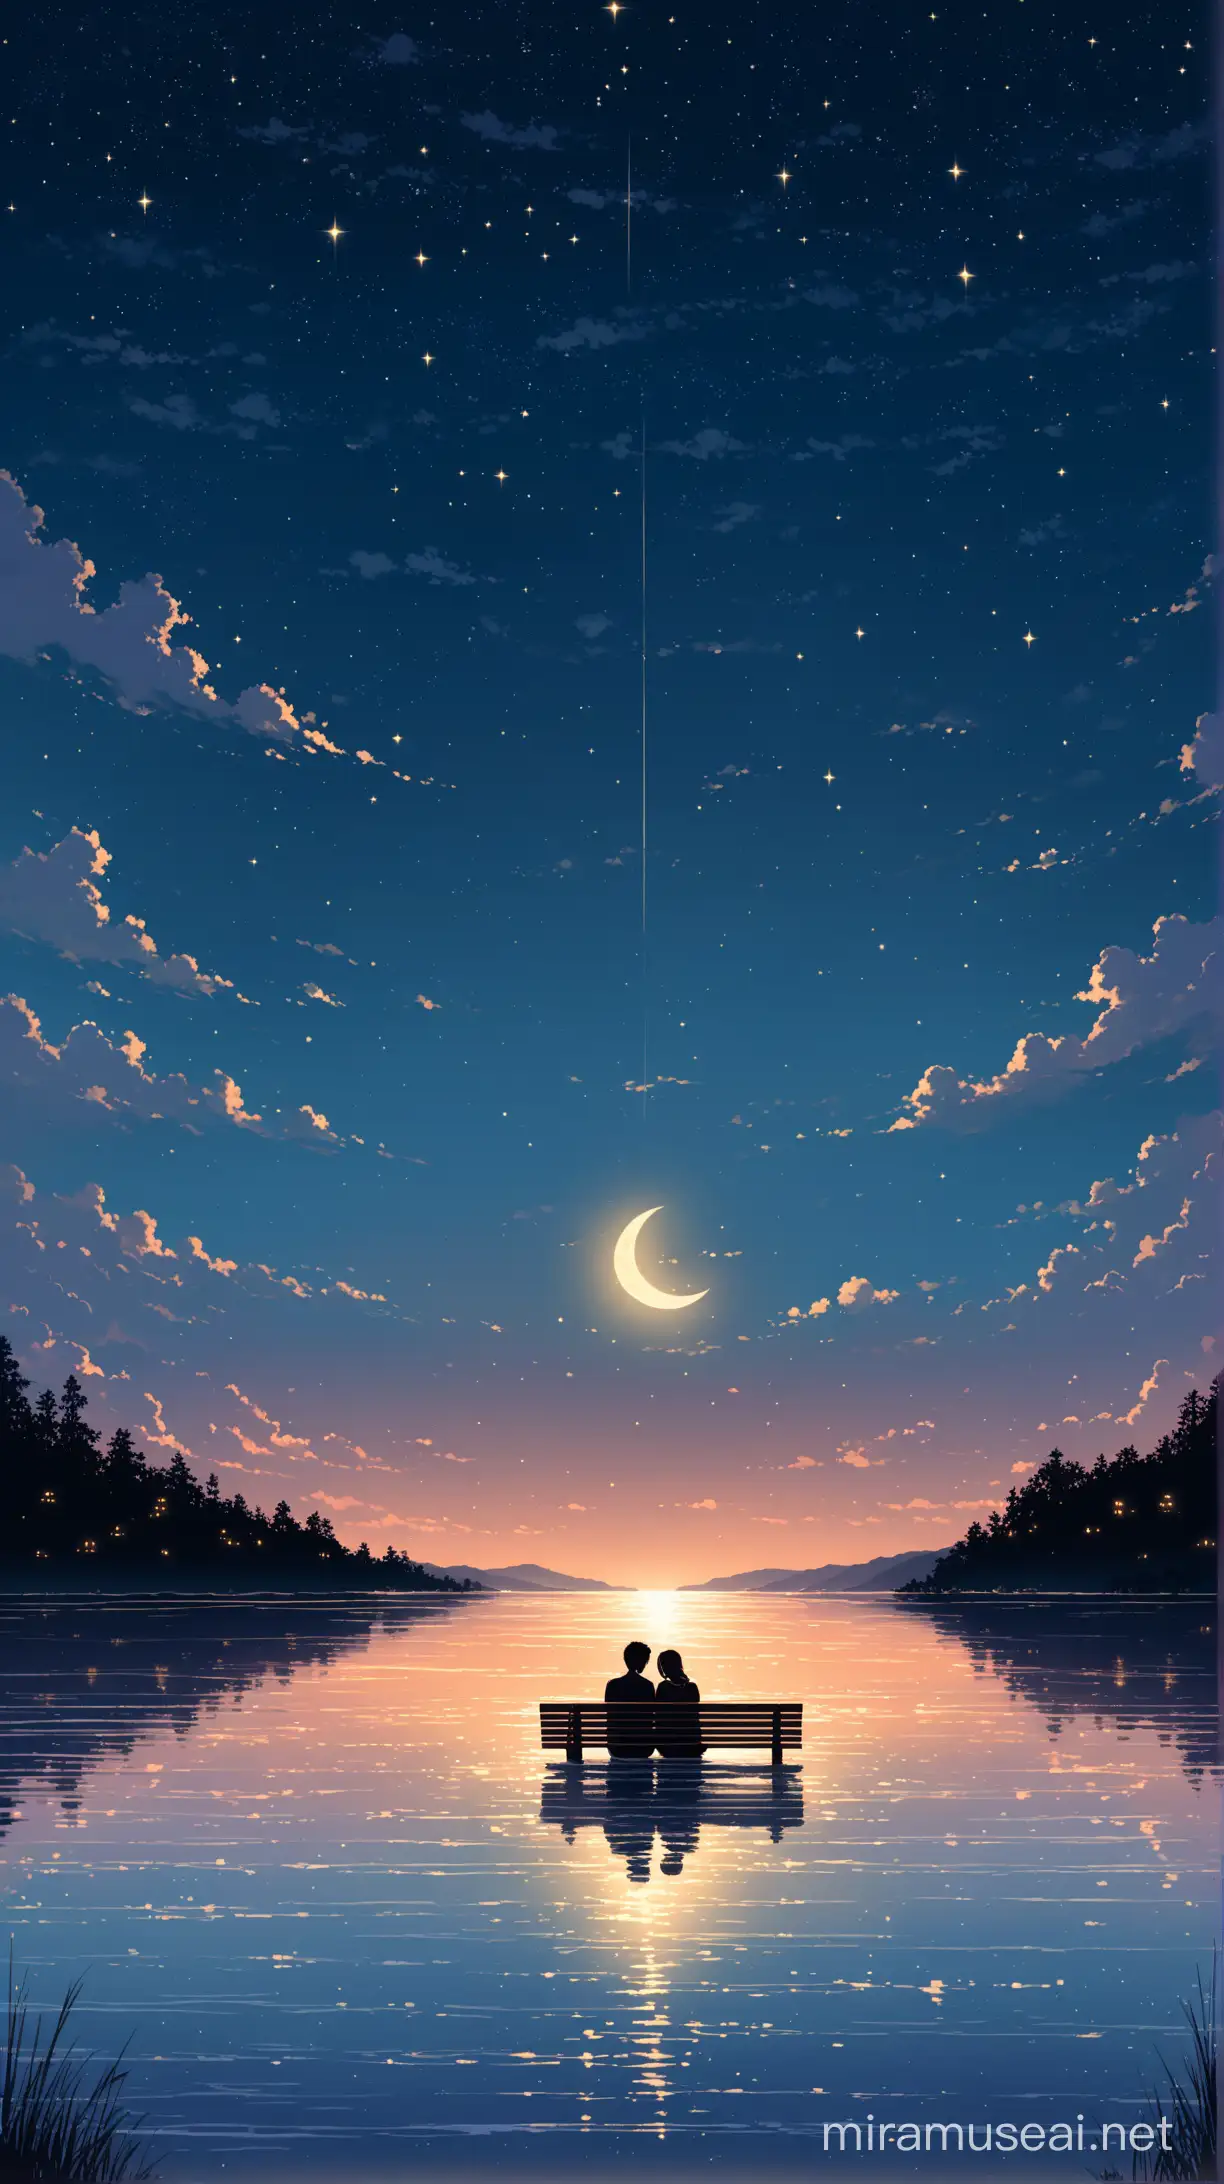 Romantic Couple Silhouetted by Moonlit Lakeside